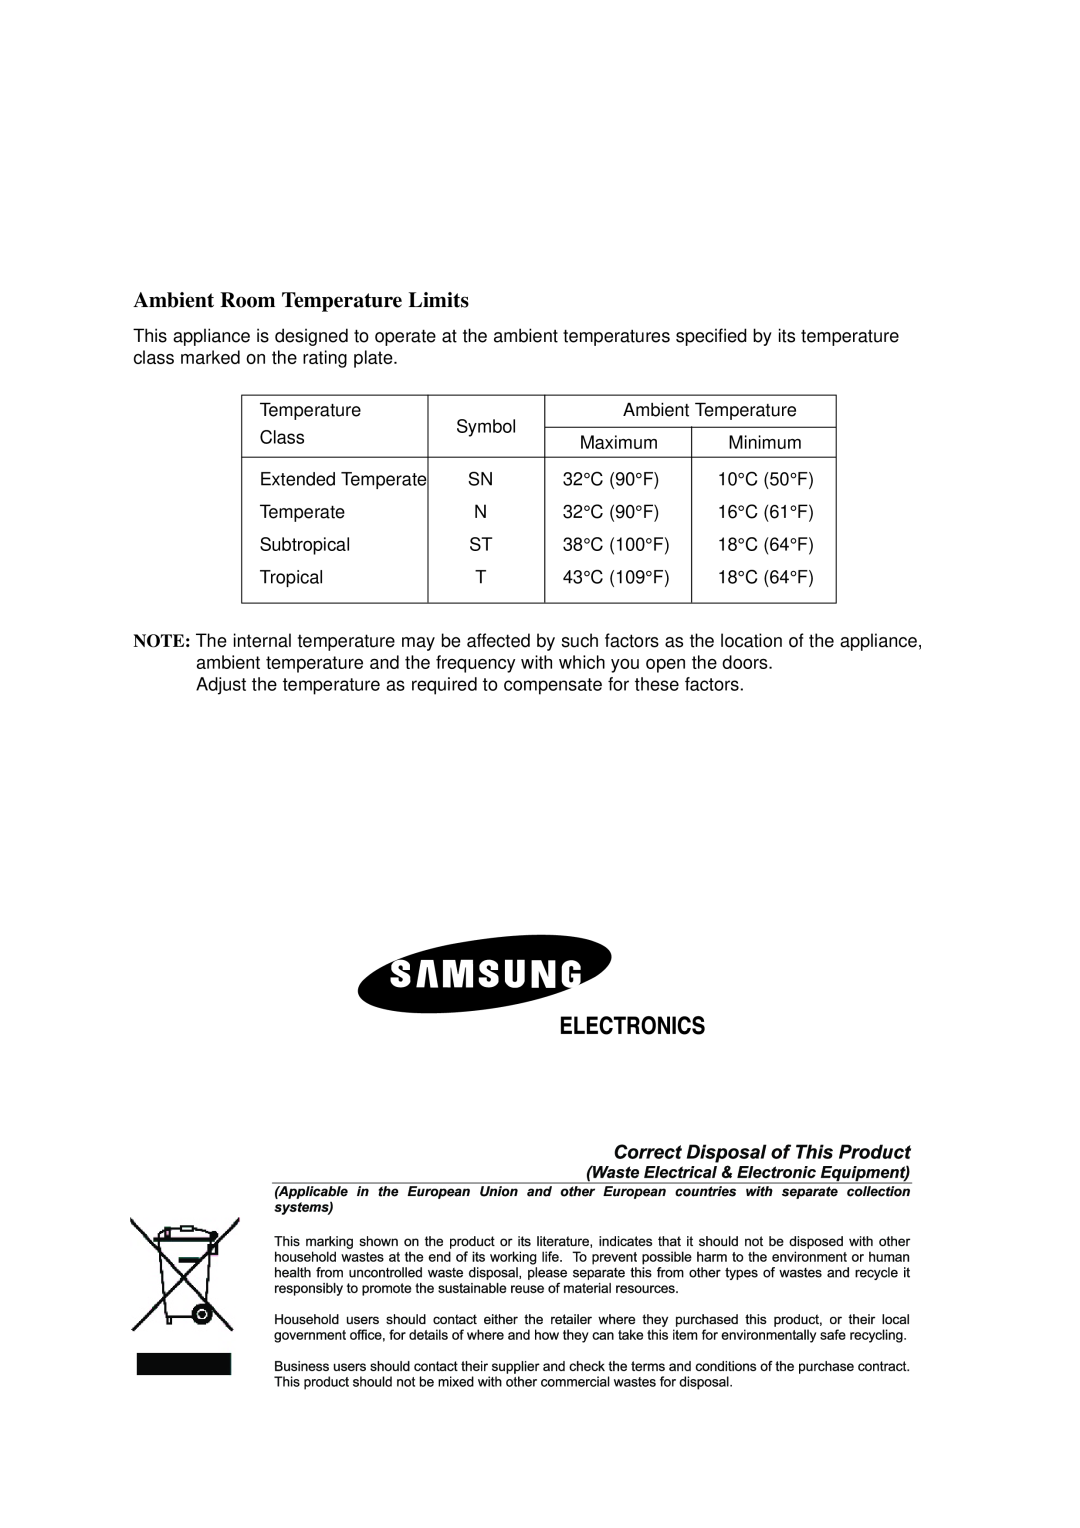 Samsung RS20 owner manual Ambient Room Temperature Limits 